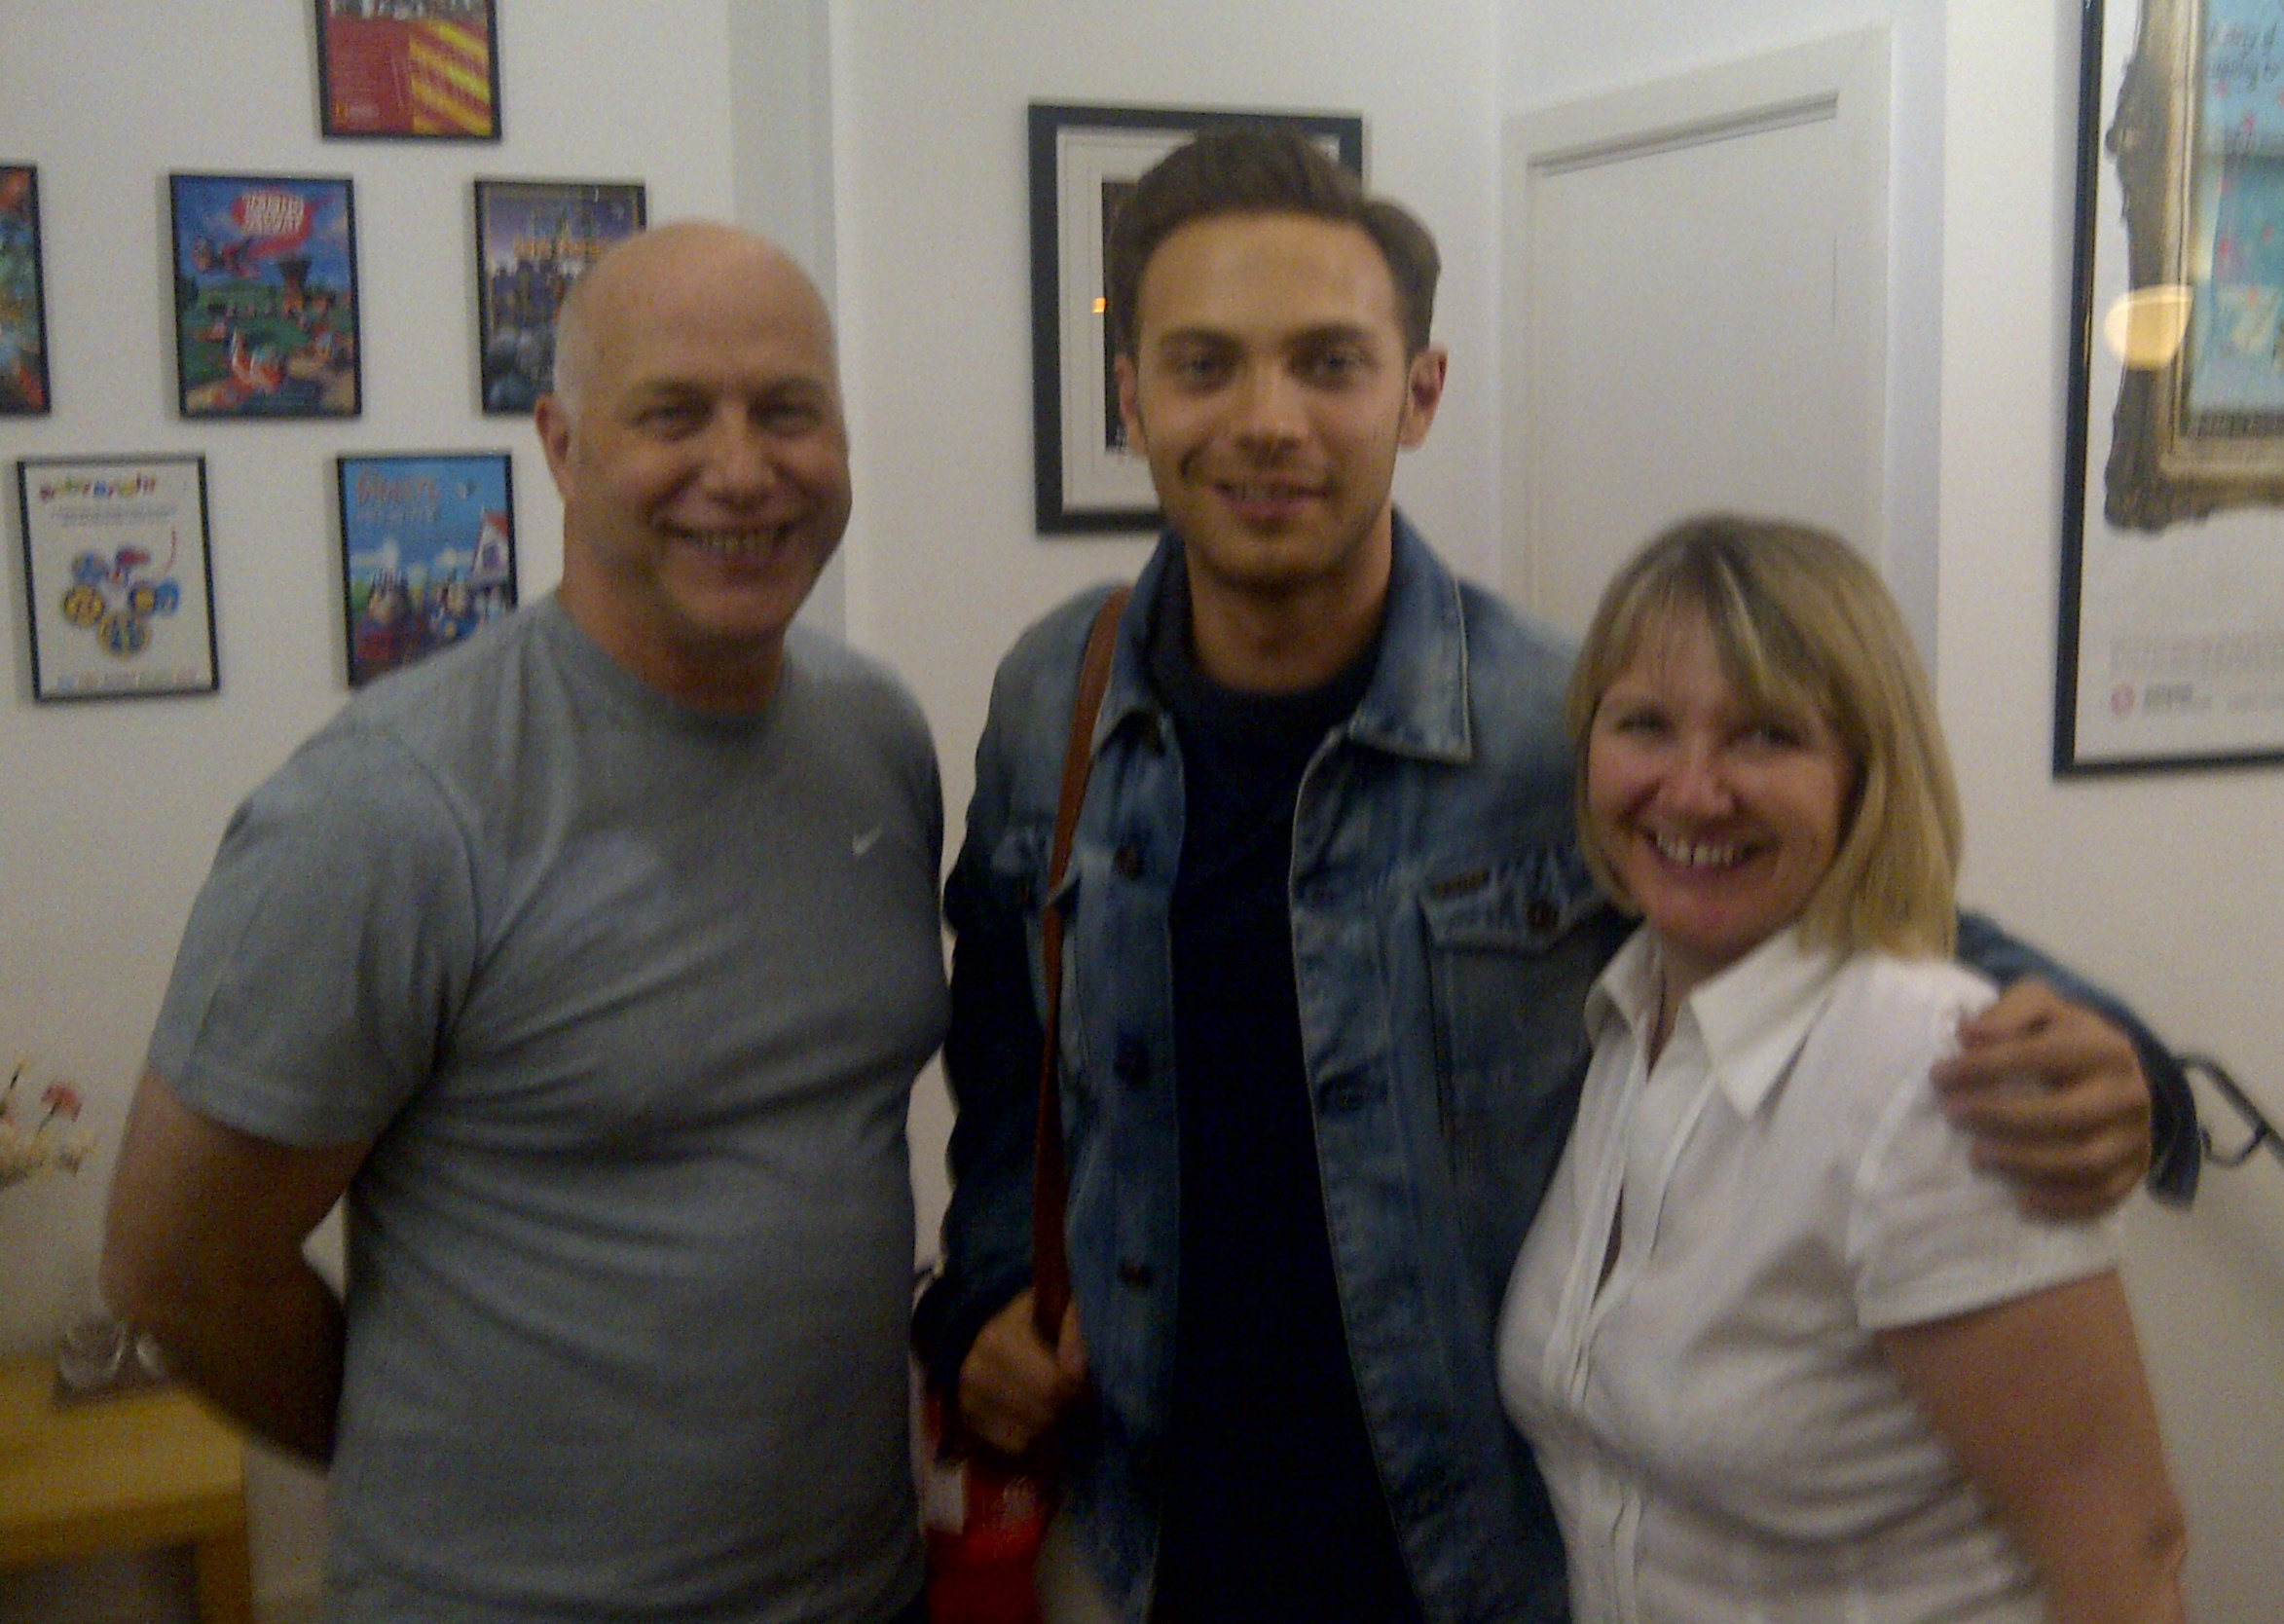 Neil Hillman MPSE with Matt Di Angelo and Facility Manager Heather Reinman, at The Audio Suite for the BBC 'Death in Paradise' Ep2 ADR session, 12-09-11.